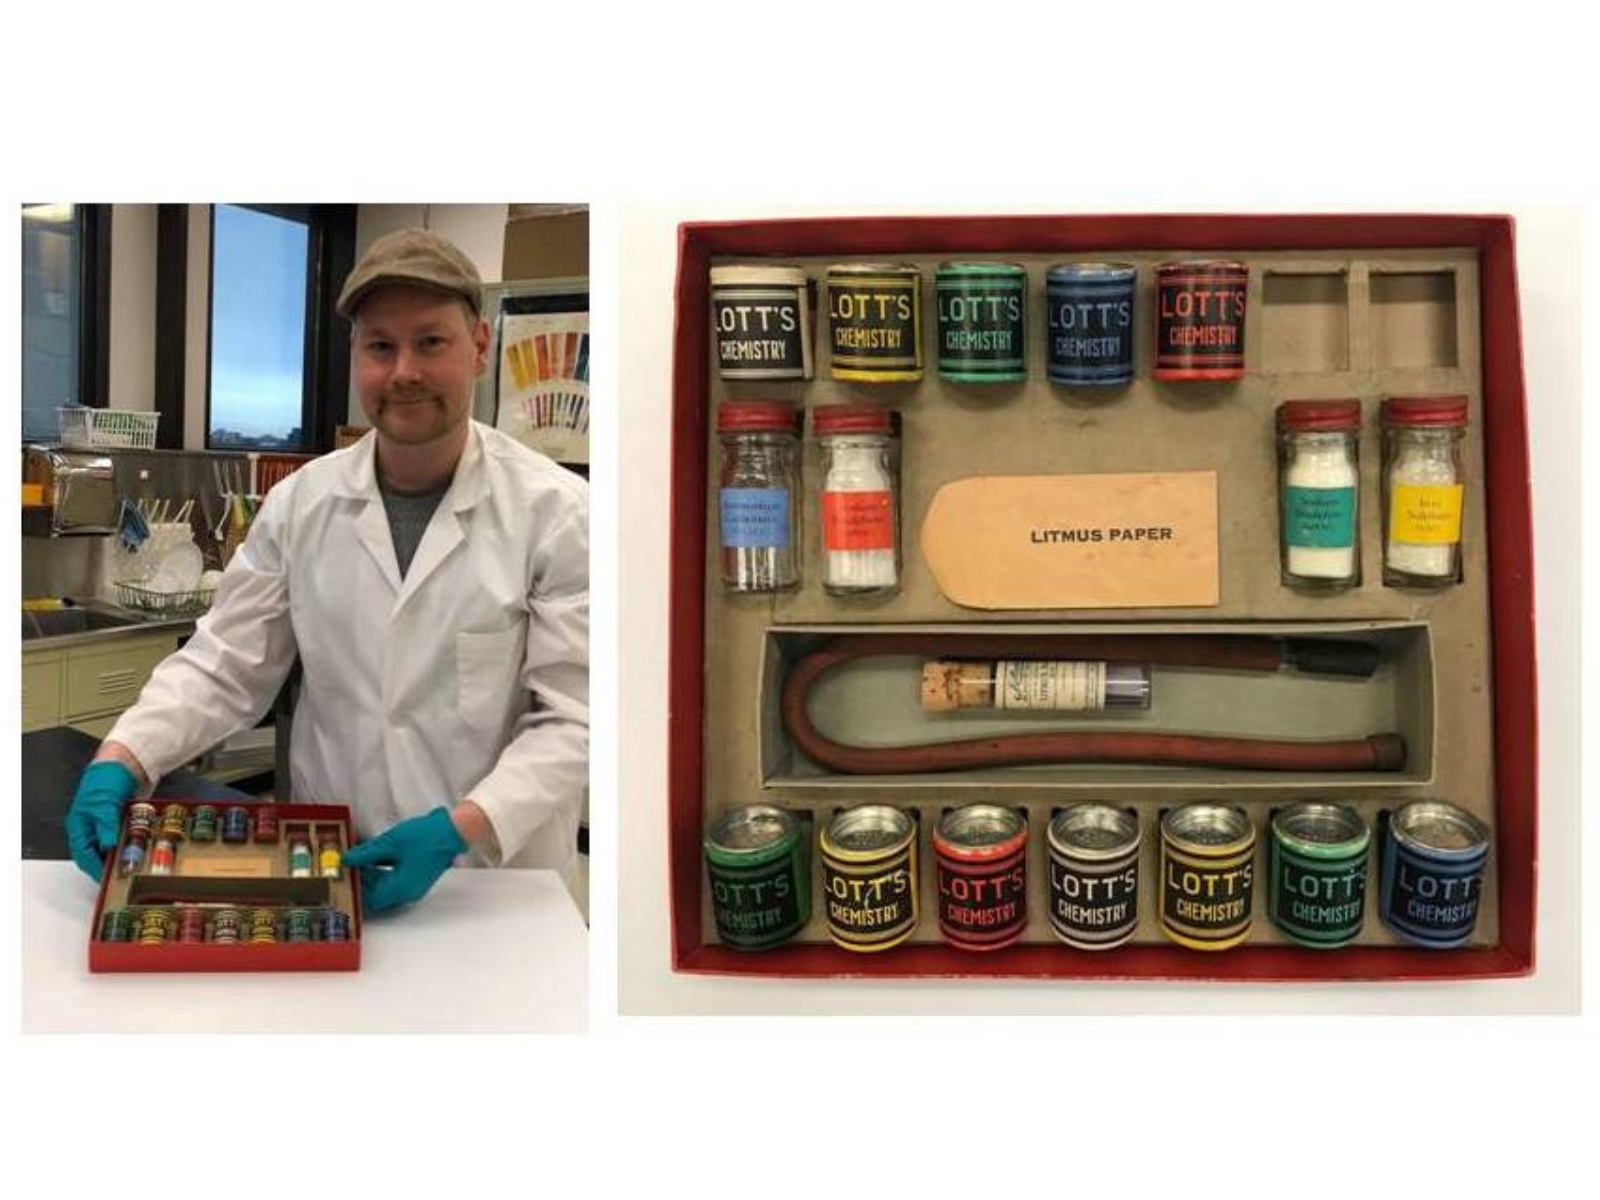 Two photos side-by-side. On the left, Conservation Technician Loren Rudisiela, wearing a white lab coat and teal gloves, holding up the stabilized and reassembled chemistry set. On the right, looking down into the red carboard box with the stabilized insert holding the many pieces of the set in place.